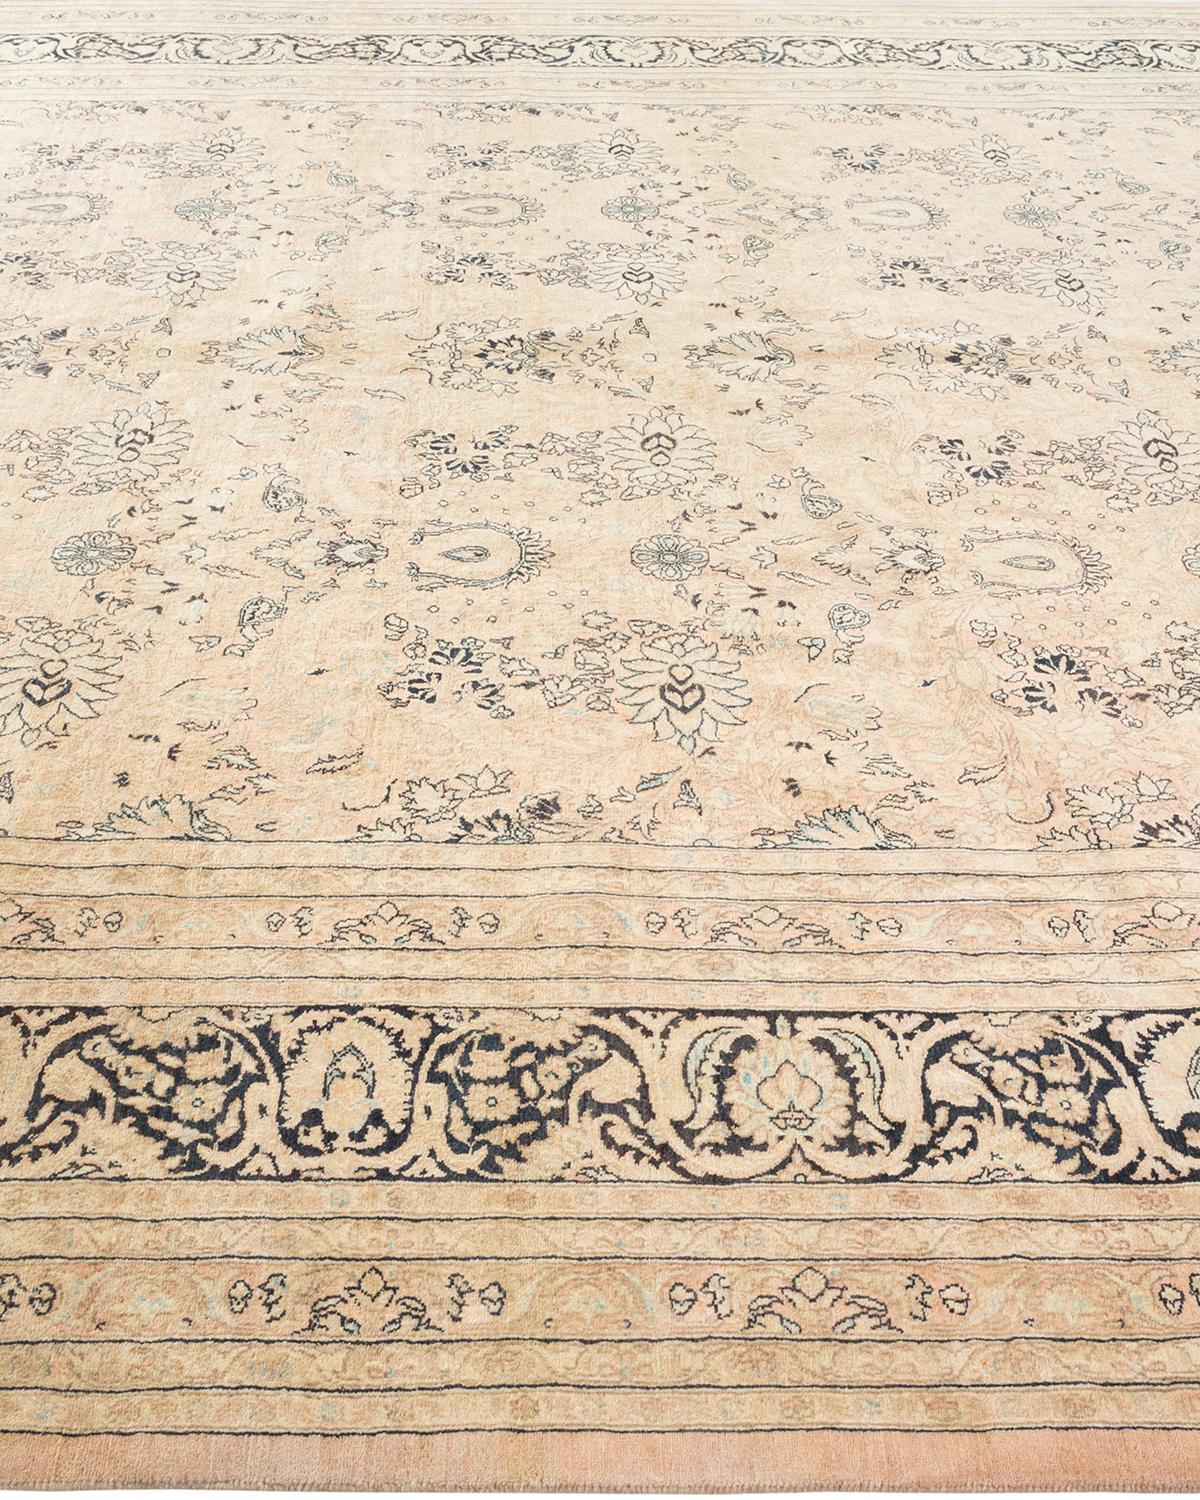 Mogul, One-of-a-Kind Hand-Knotted Area Rug, Beige In New Condition For Sale In Norwalk, CT